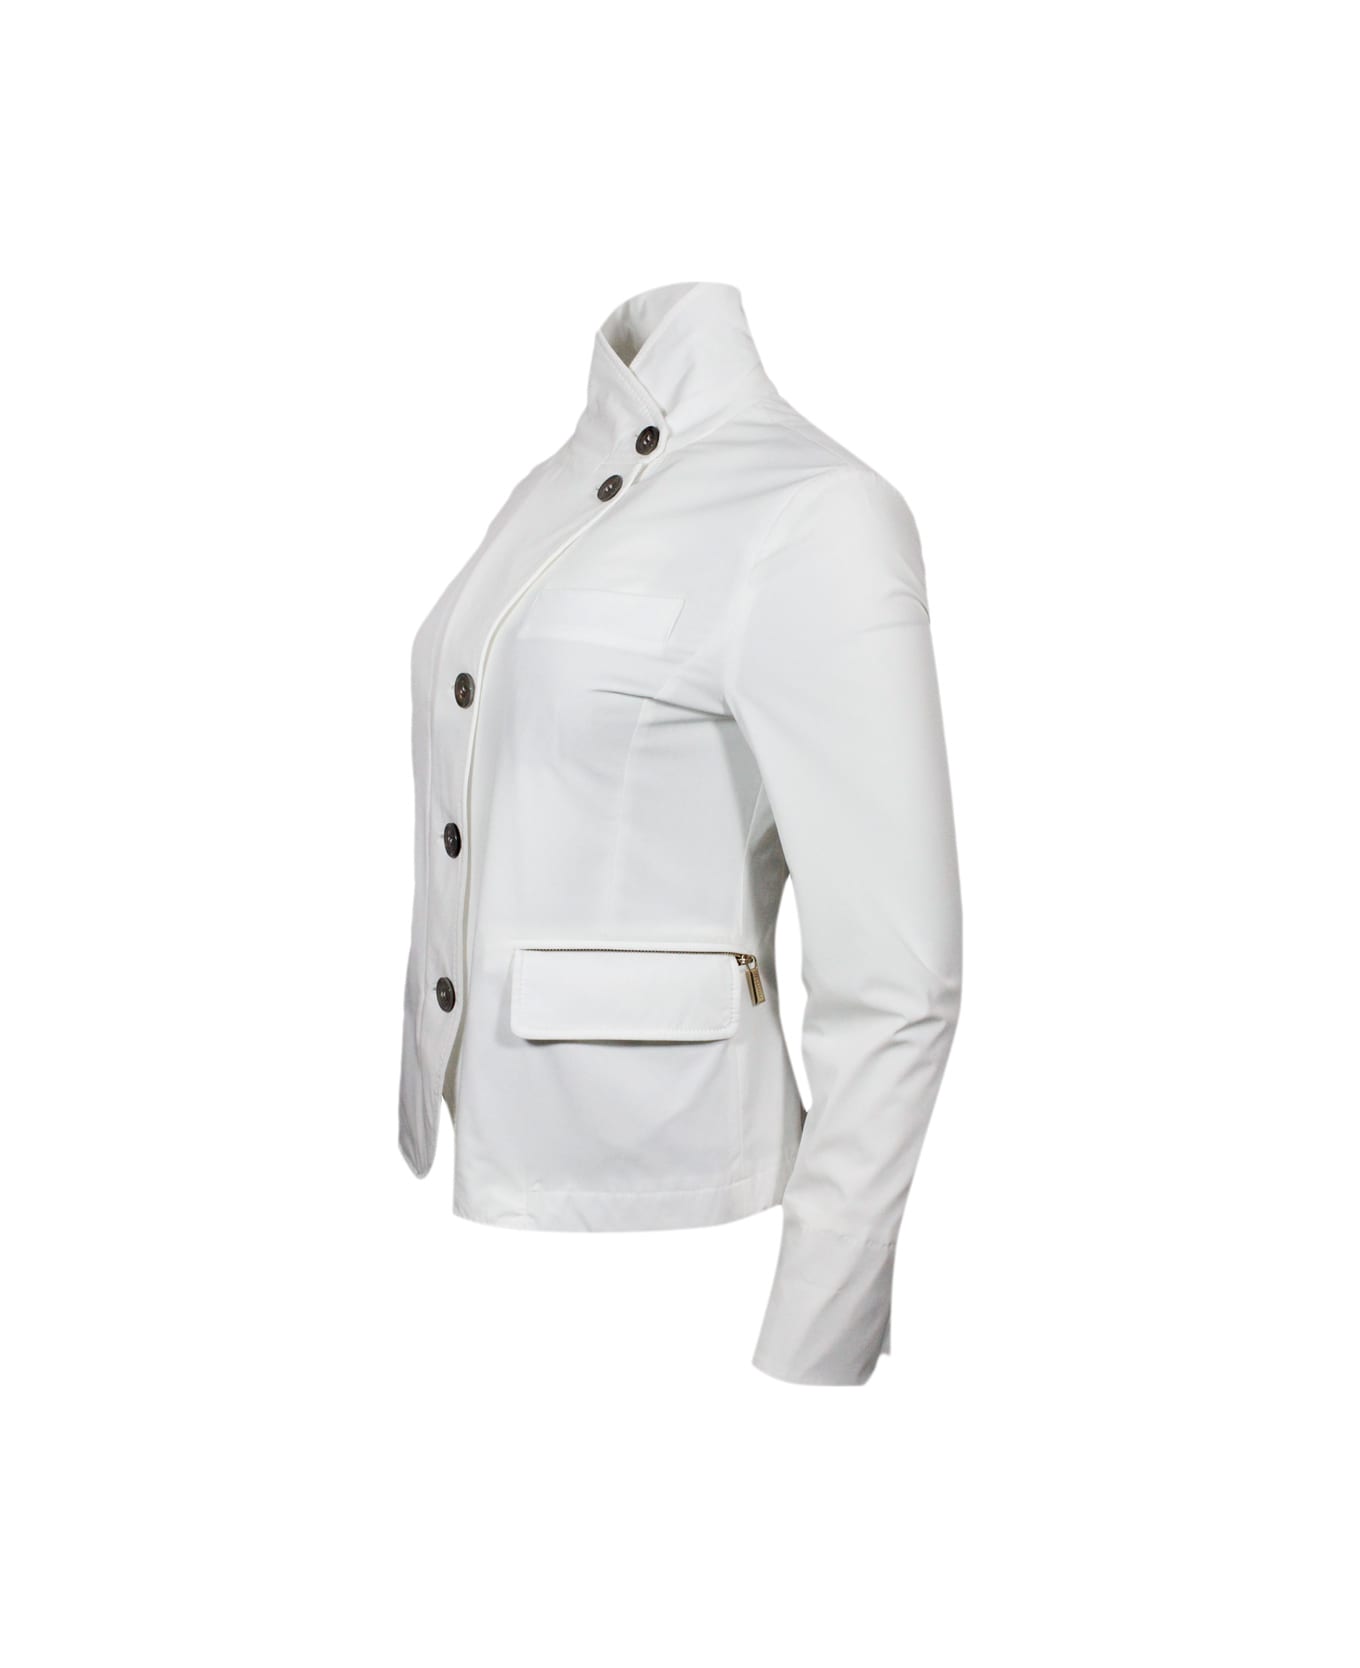 Moorer Blazer In Stretch Technical Fabric With Cotton Jersey Lining. Zip And Button Closure - White